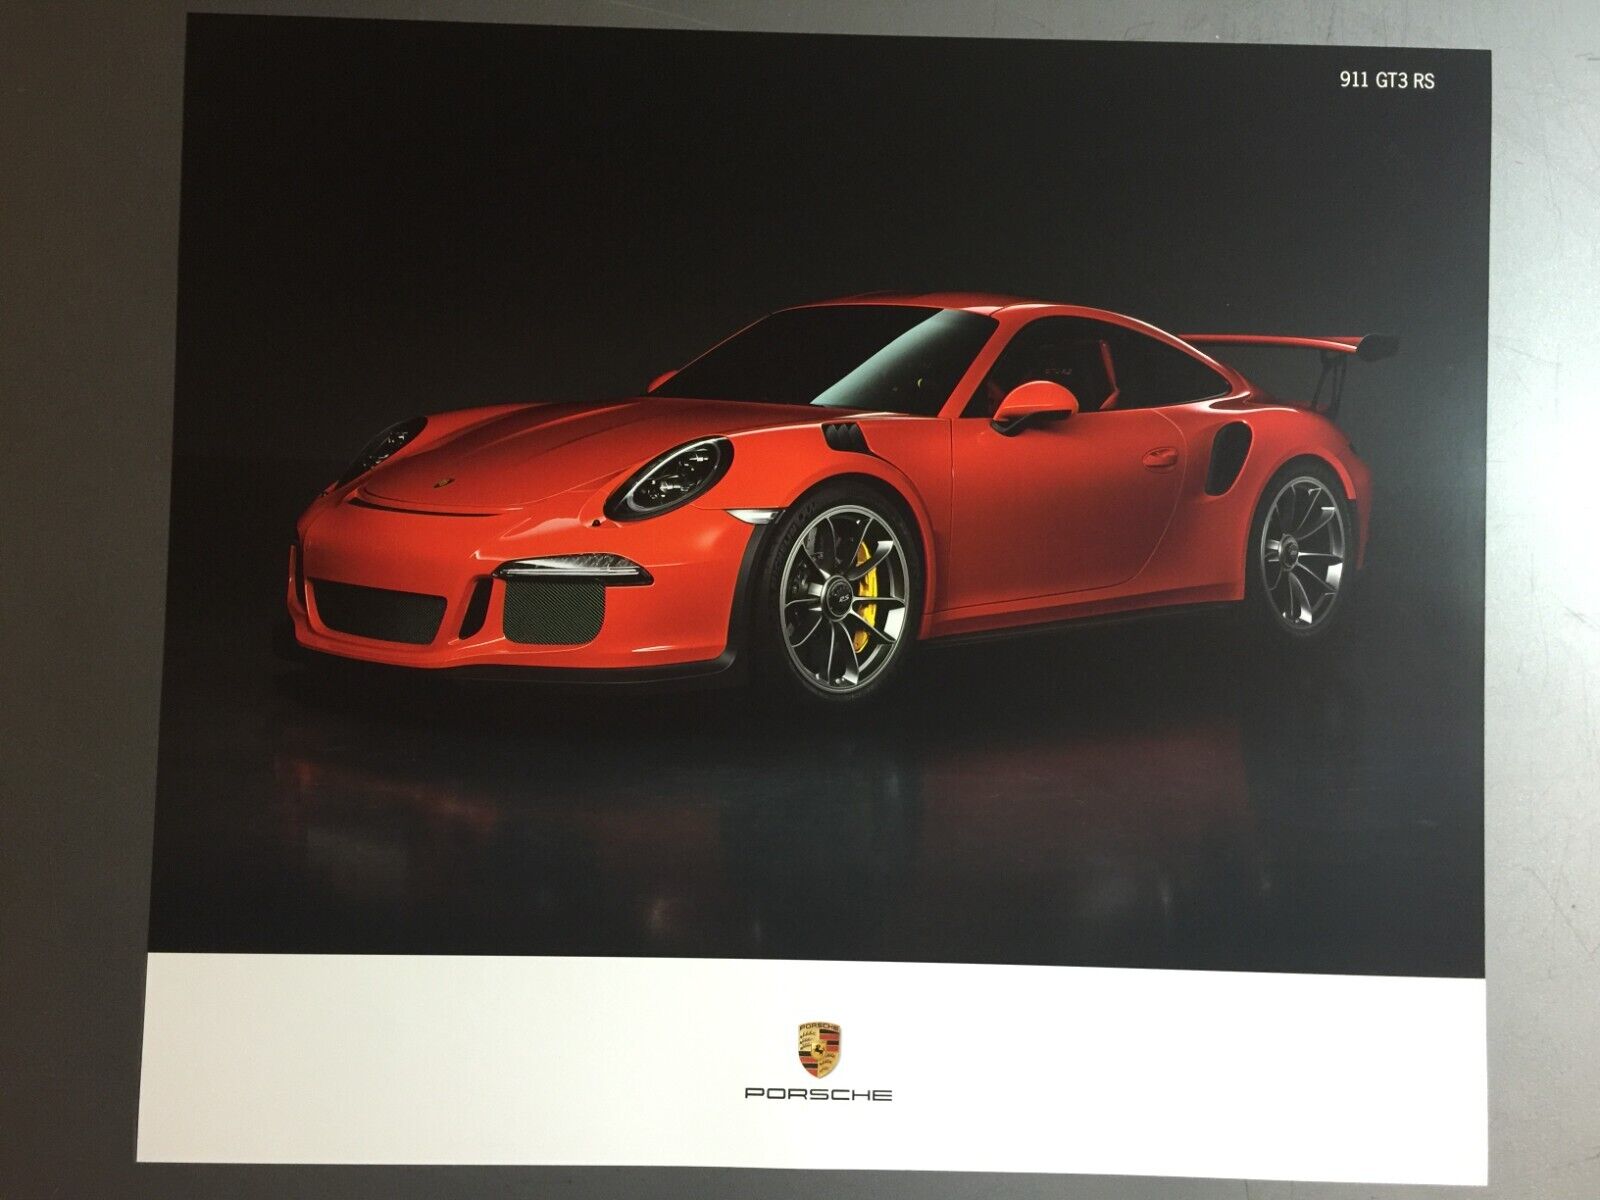 2016 Porsche 911 GT3 RS Coupe Showroom Advertising Poster - RARE Awesome L@@K